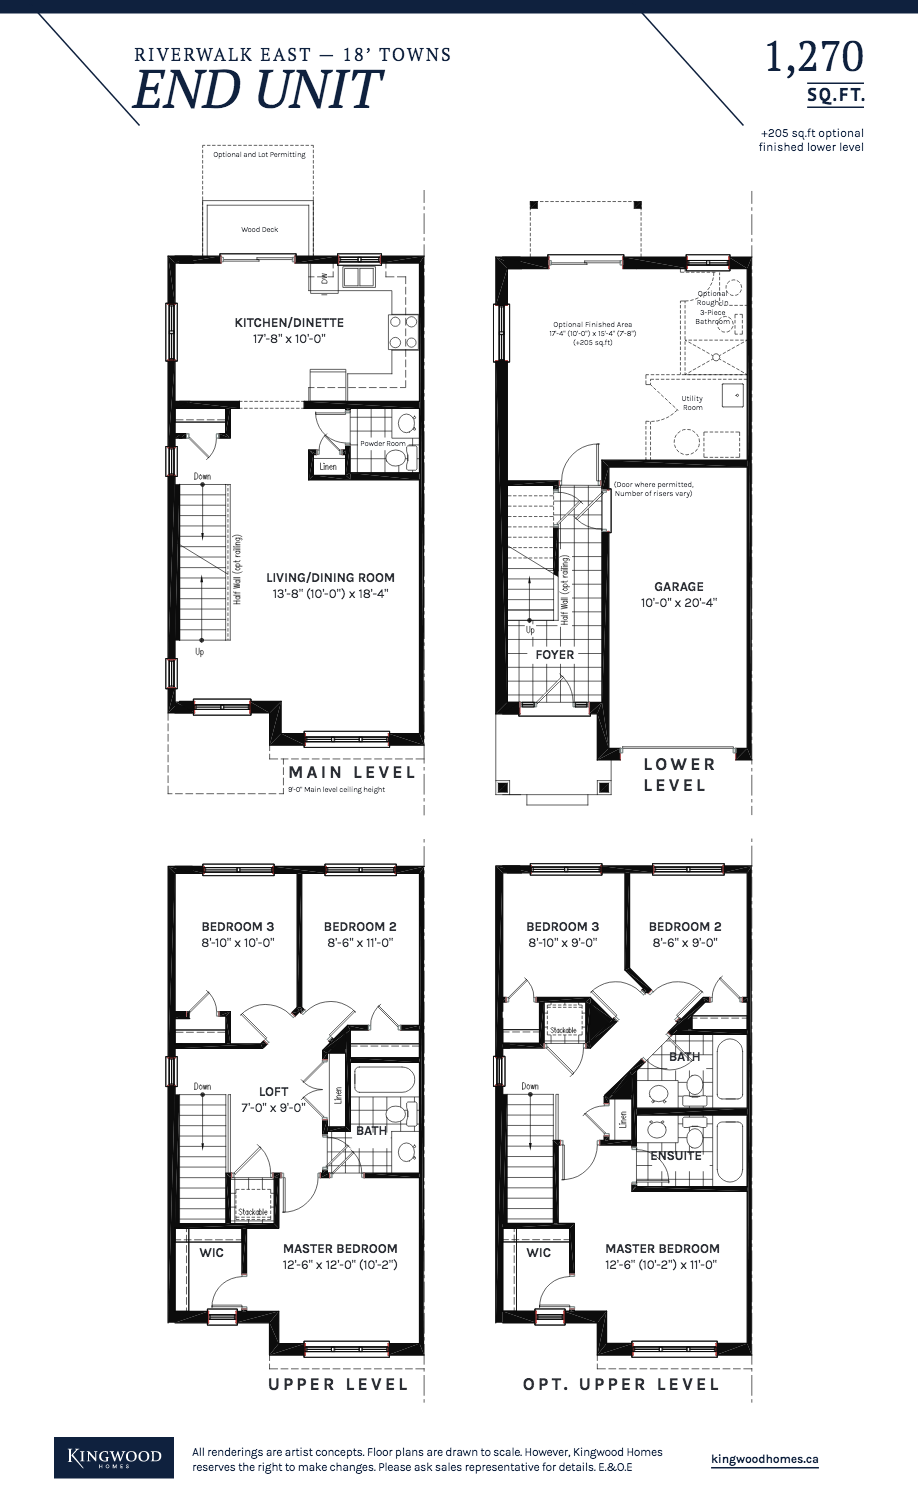  End Unit  Floor Plan of Riverwalk East Towns with undefined beds